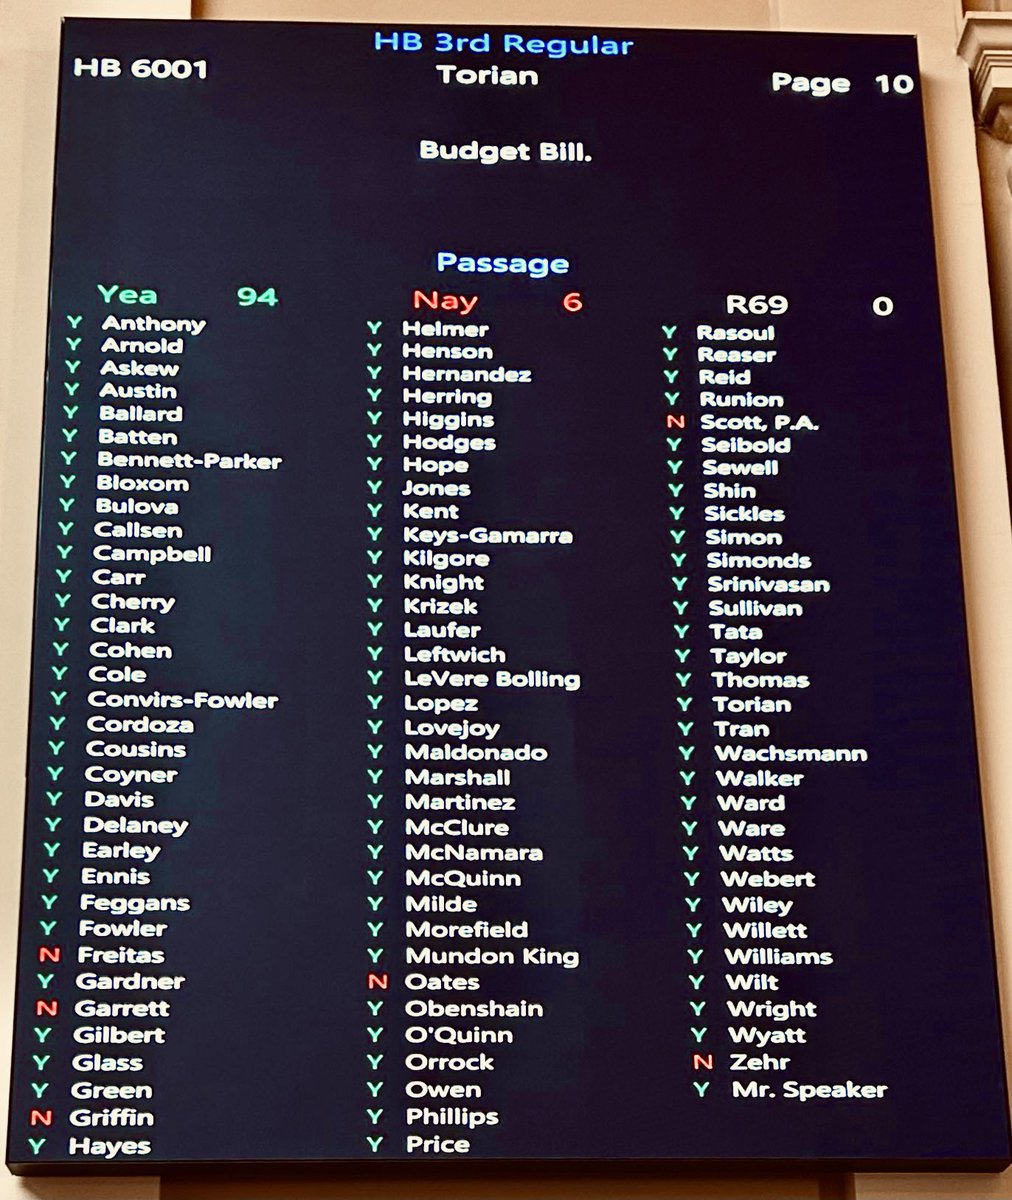 The new budget, which contains historic investments in K-12 public education & early childhood programs, passes 94-6 in the House of Delegates.